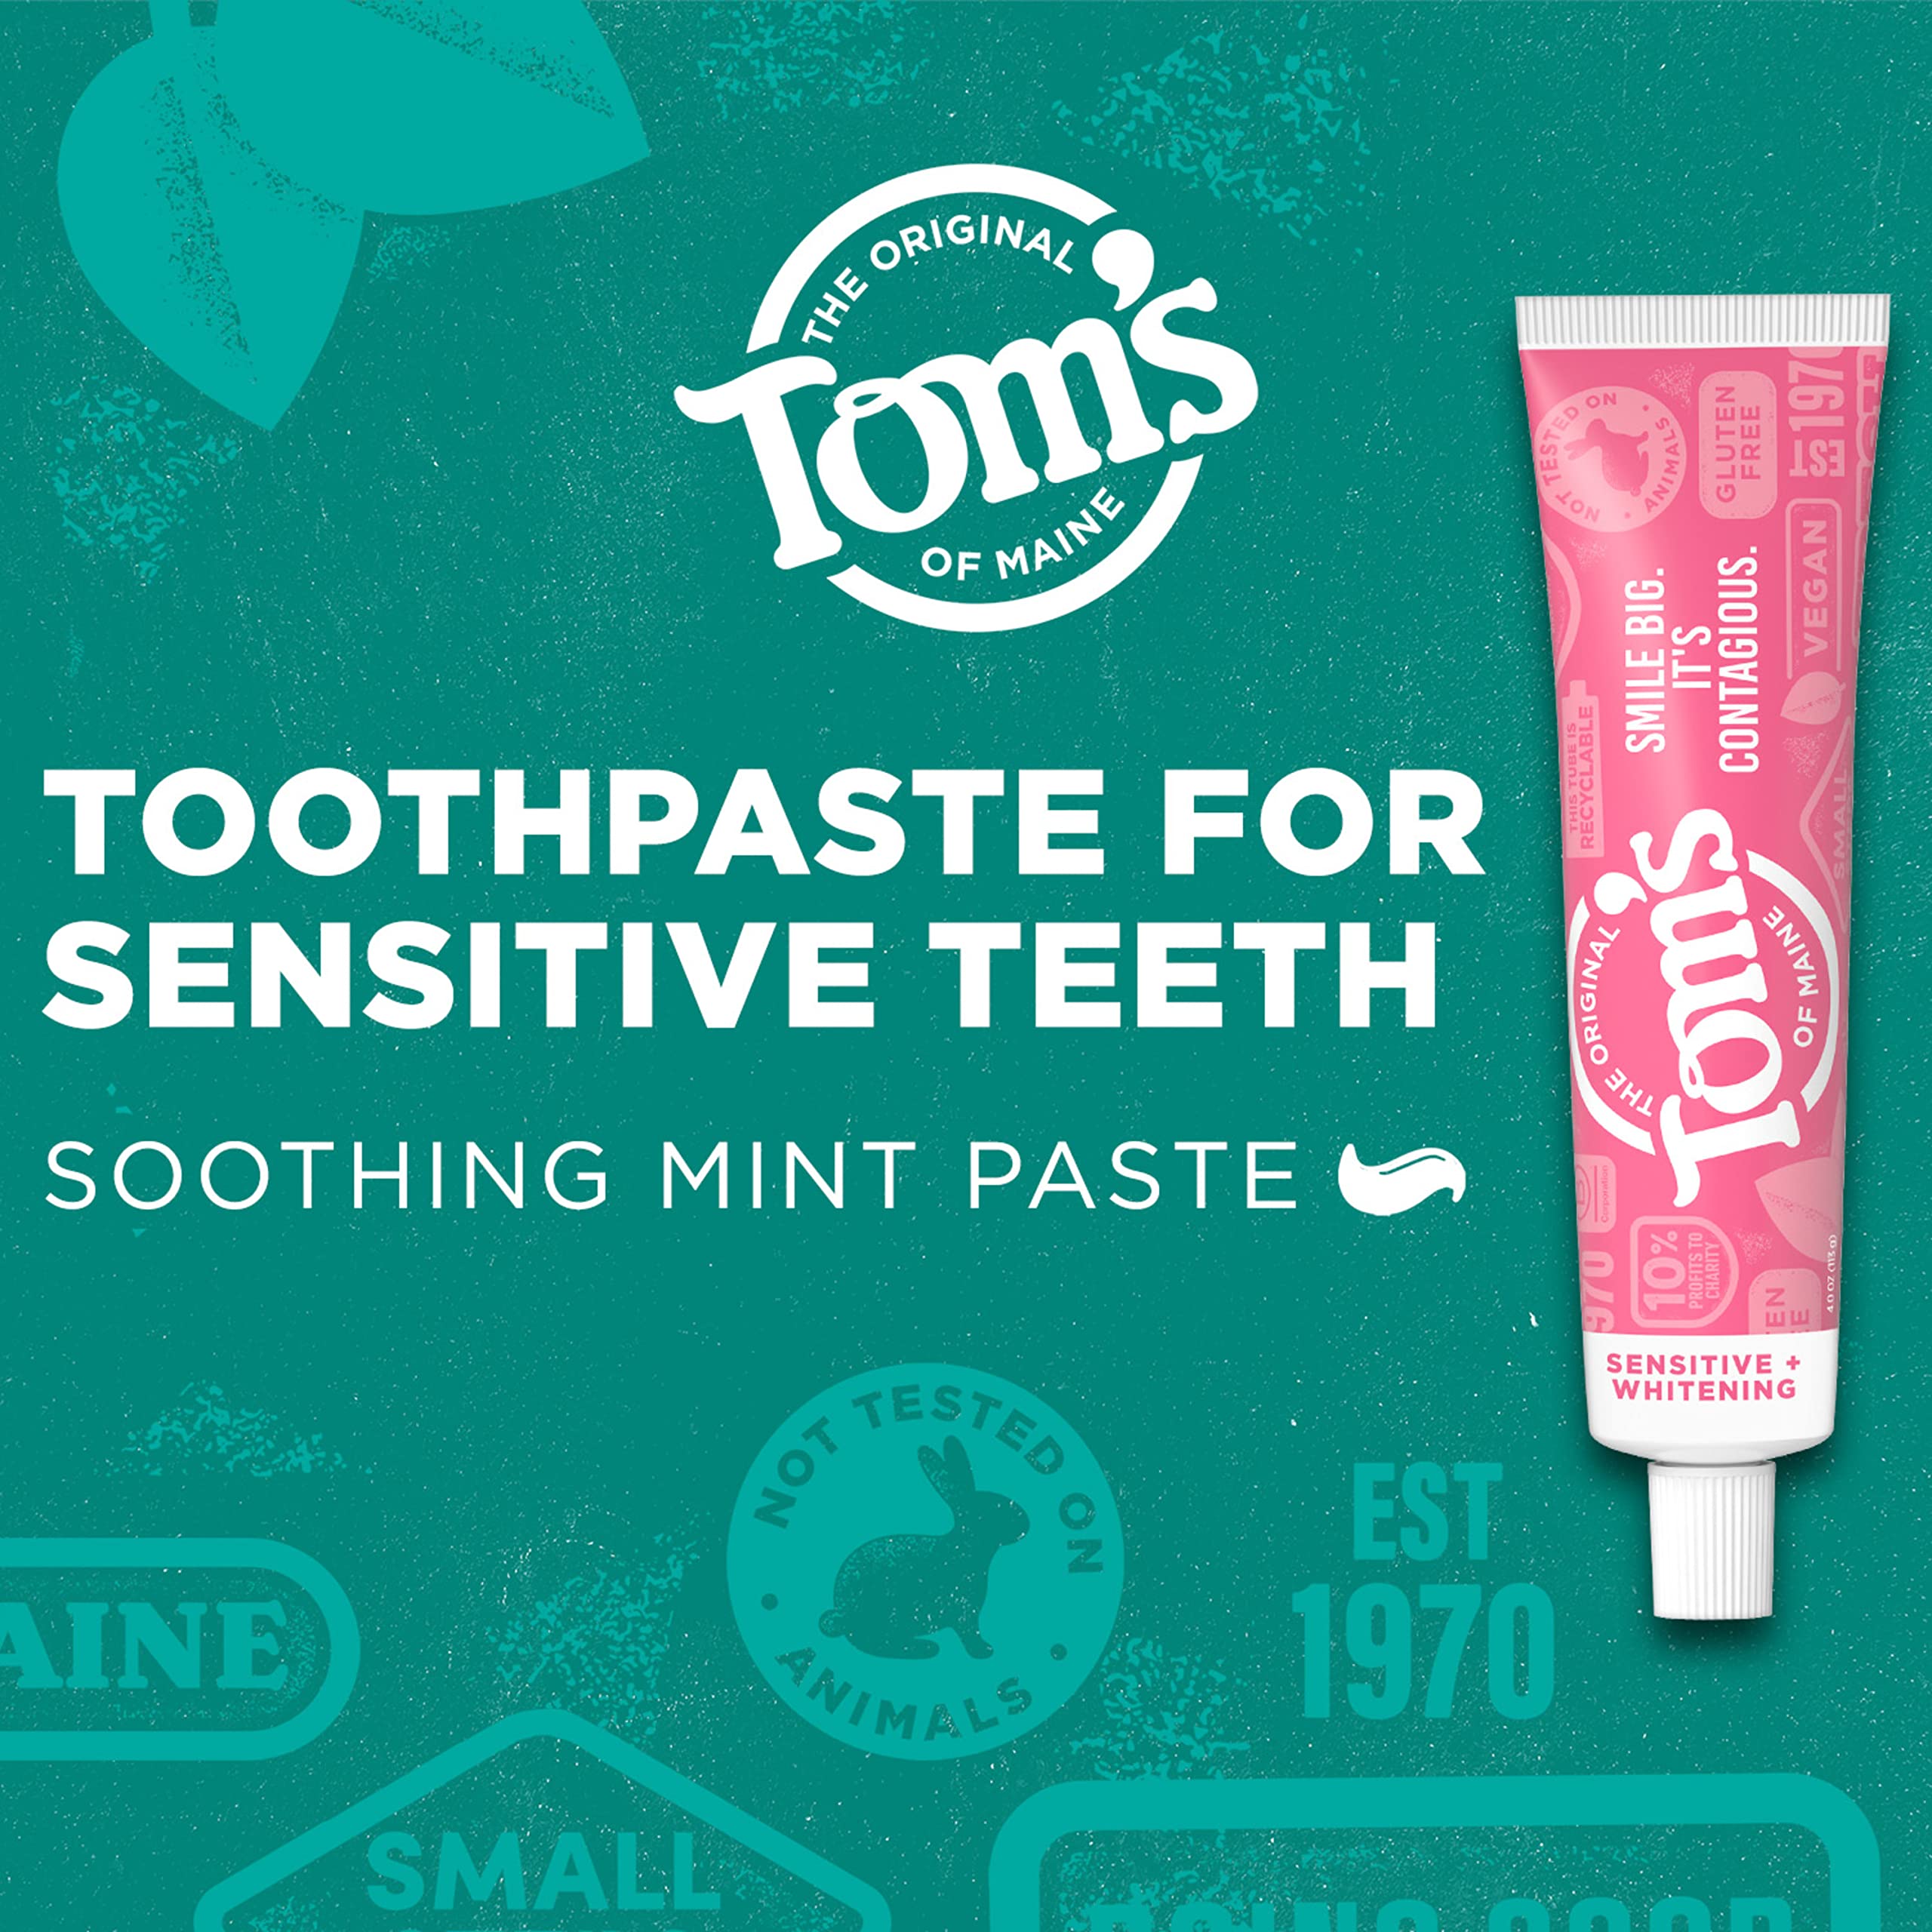 Tom’s of Maine Sensitive + Whitening Fluoride Free Toothpaste, Soothing Mint 4.0 oz 3-Pack